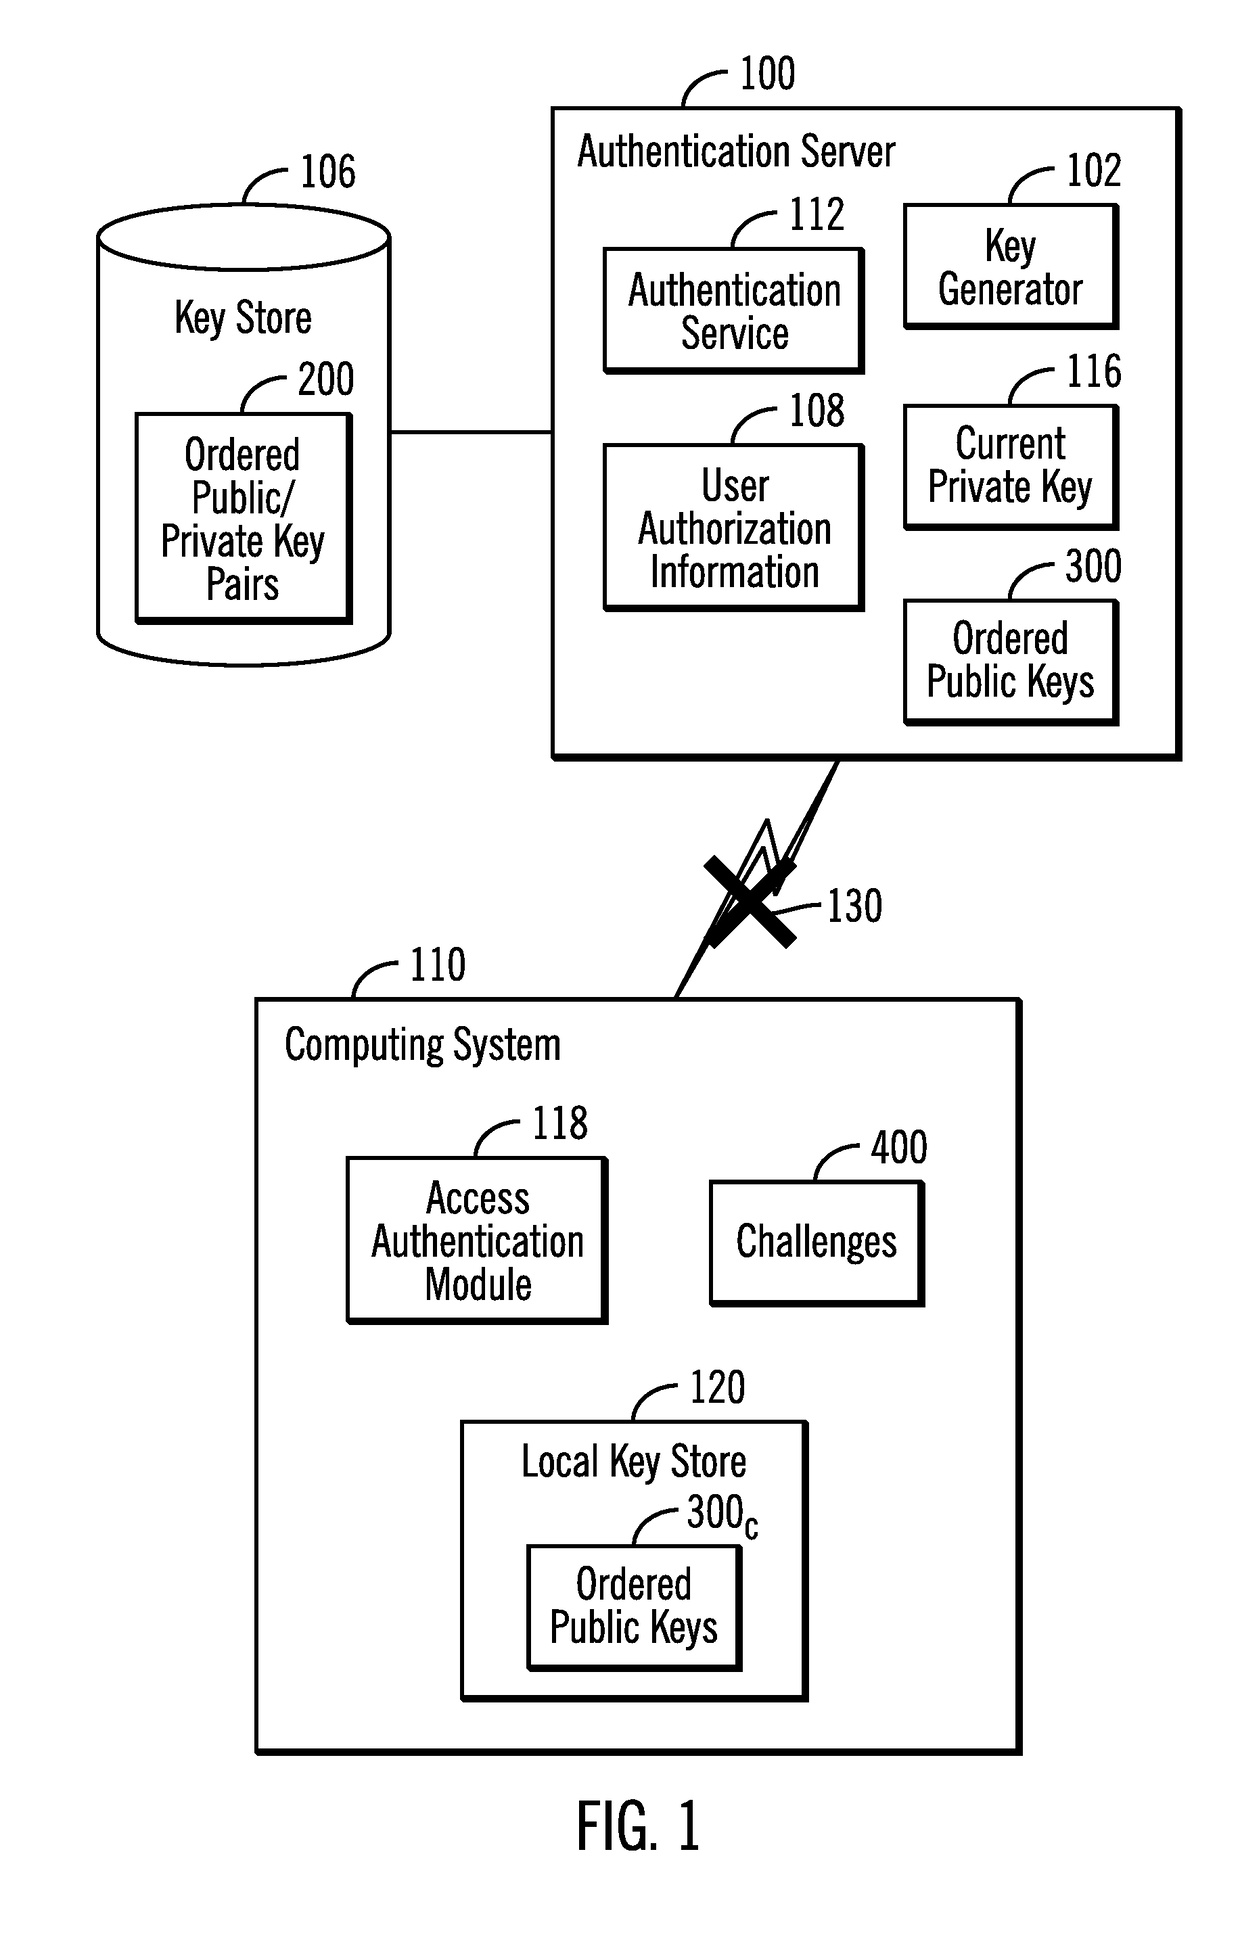 Using public keys provided by an authentication server to verify digital signatures